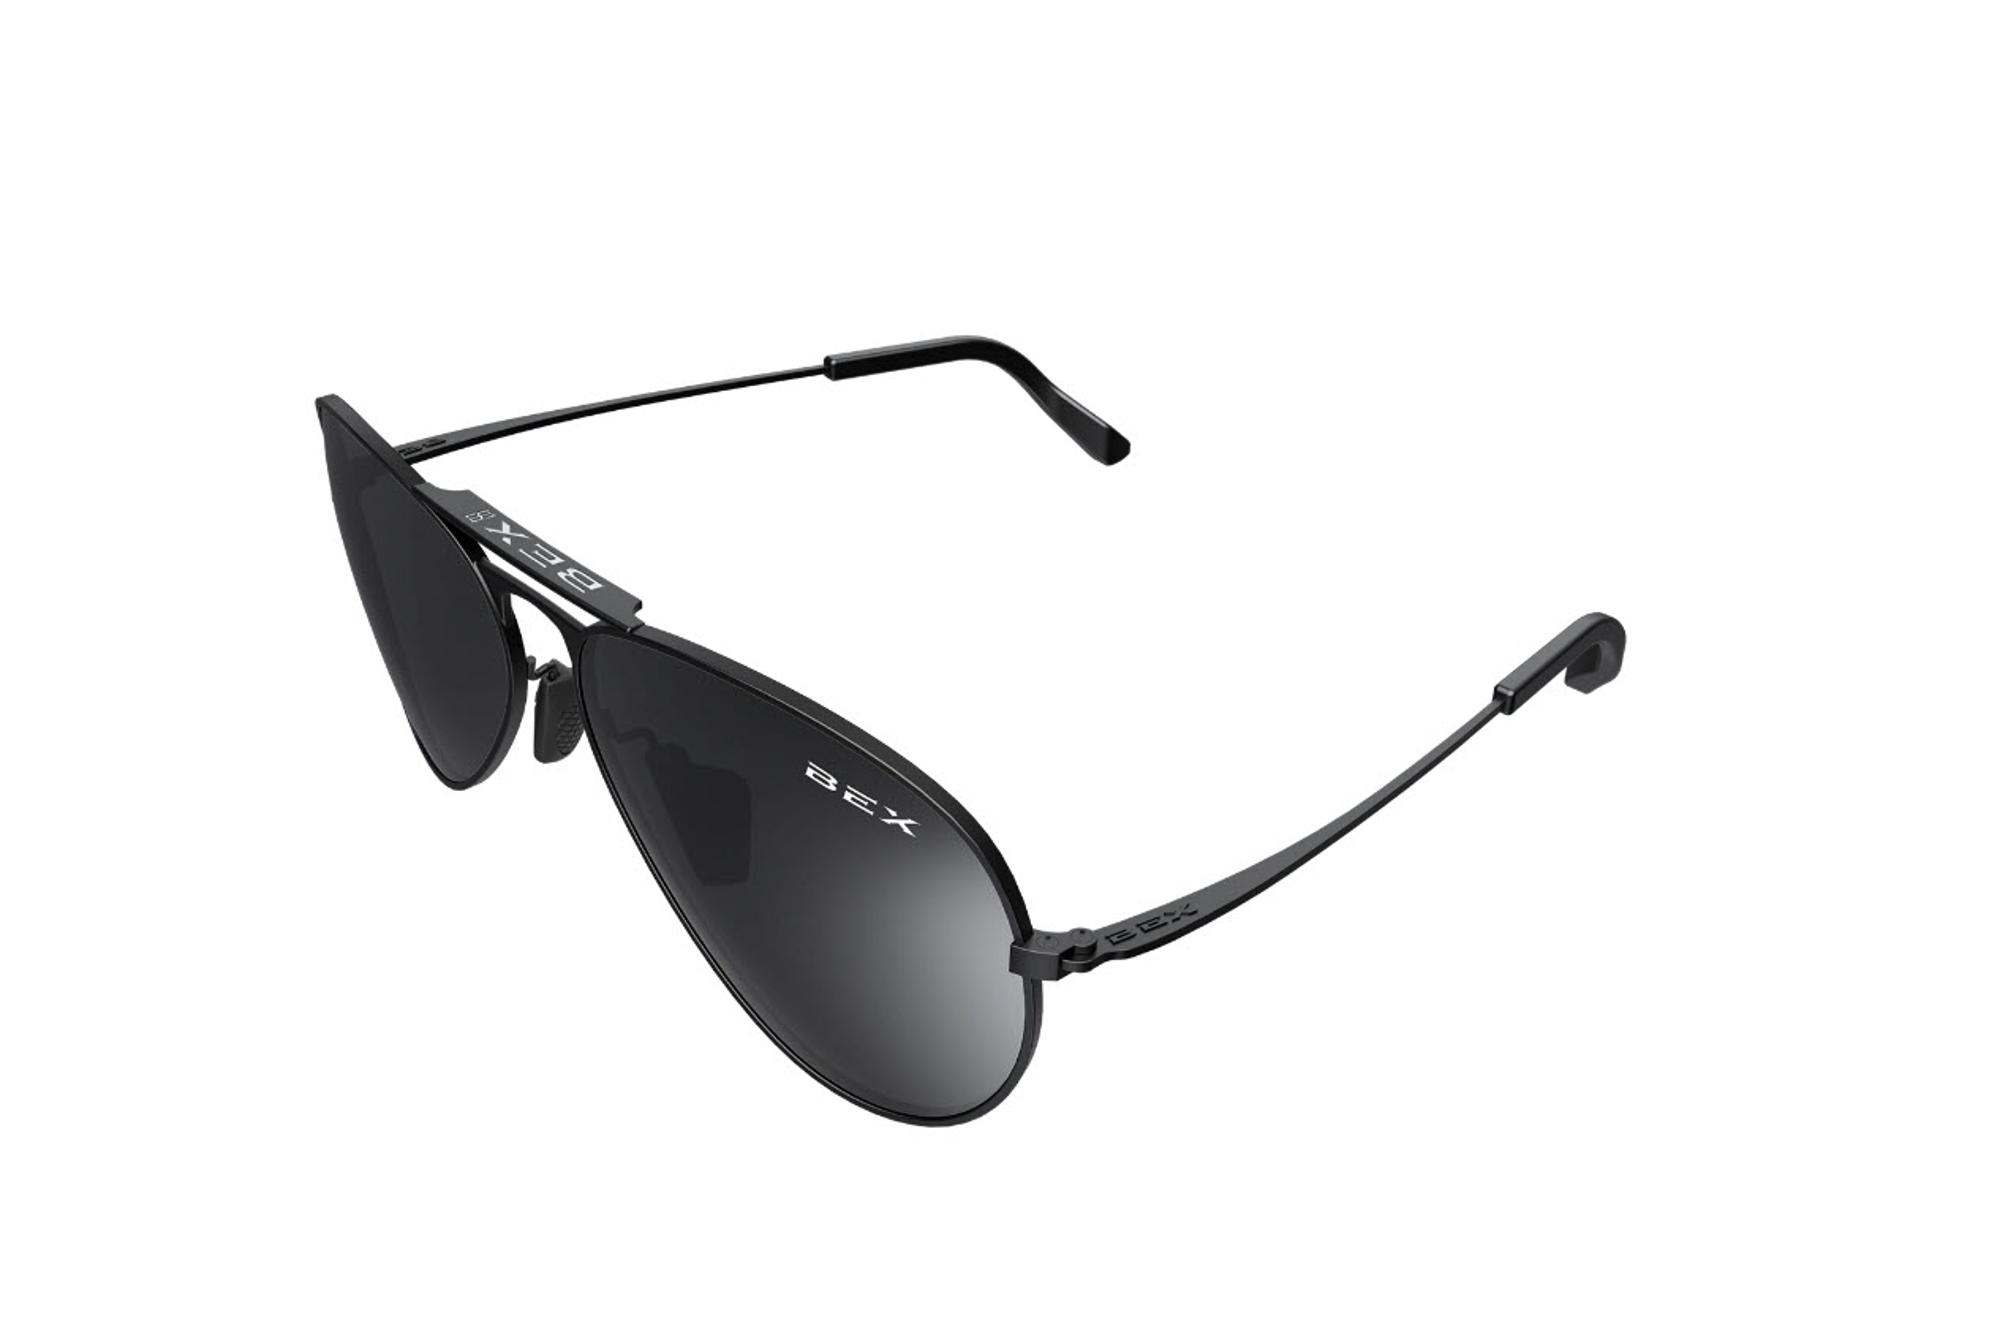 Bex Wesley Black and Grey Lightweight Polarized Sunglasses